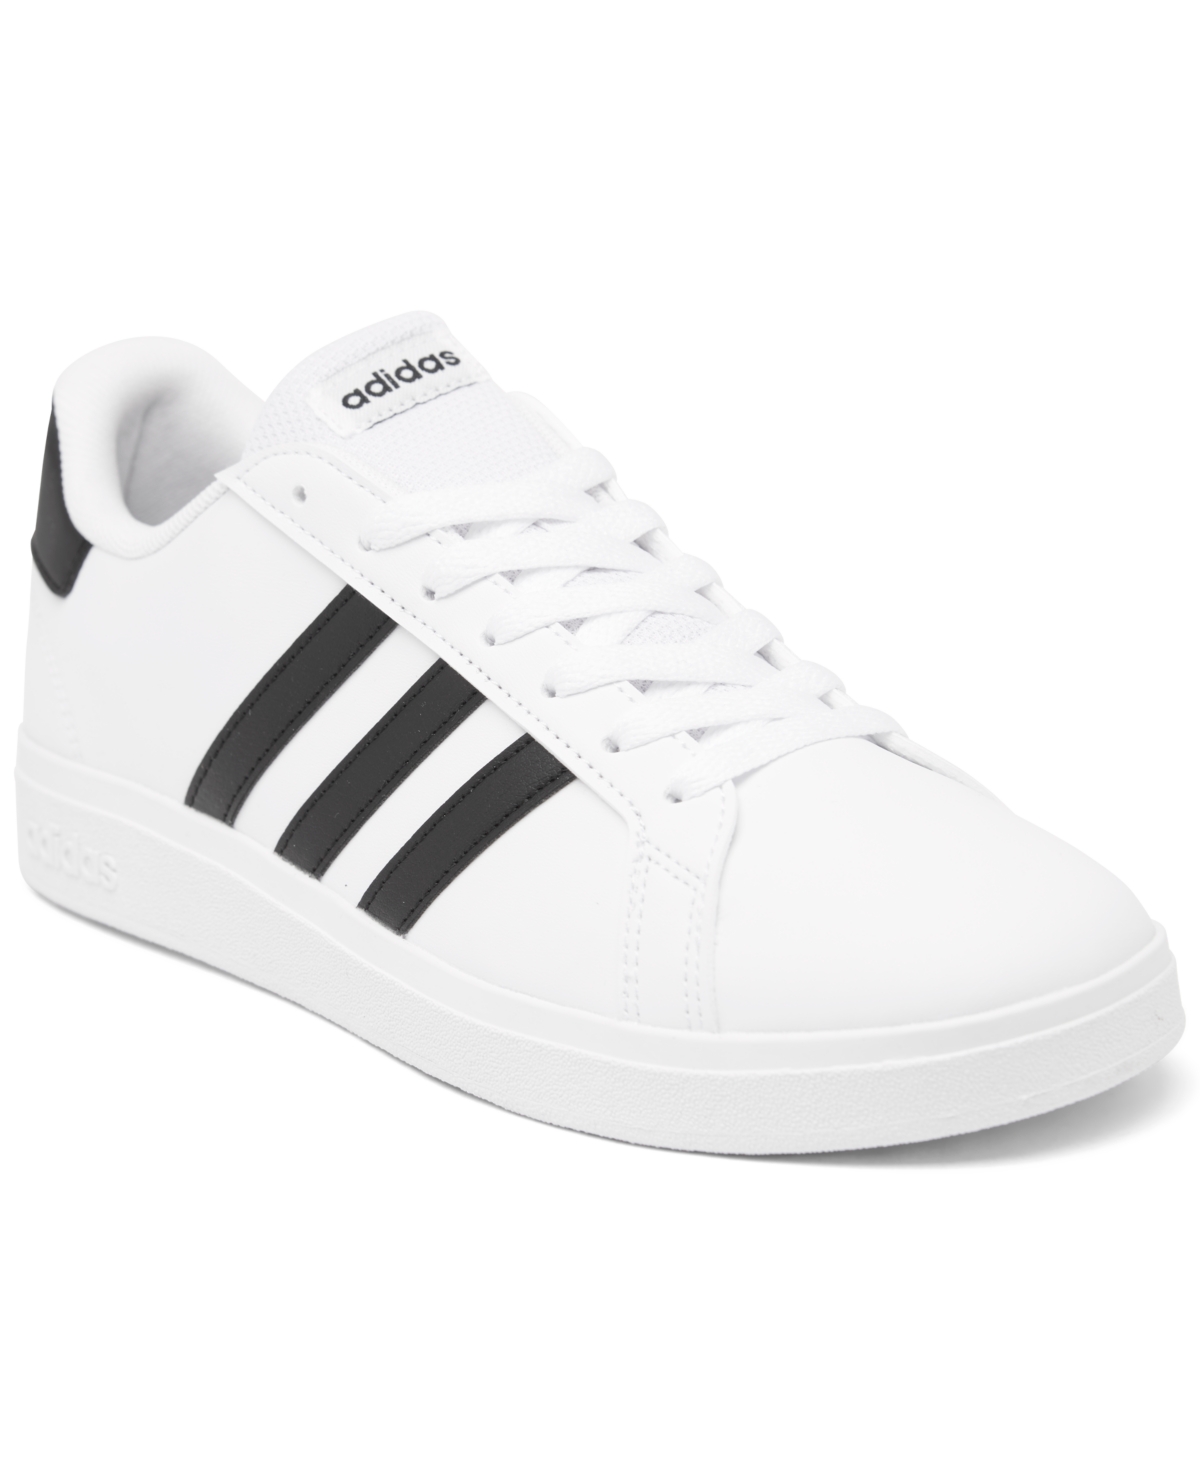 adidas Big Kids Grand Court Casual Sneakers from Finish Line